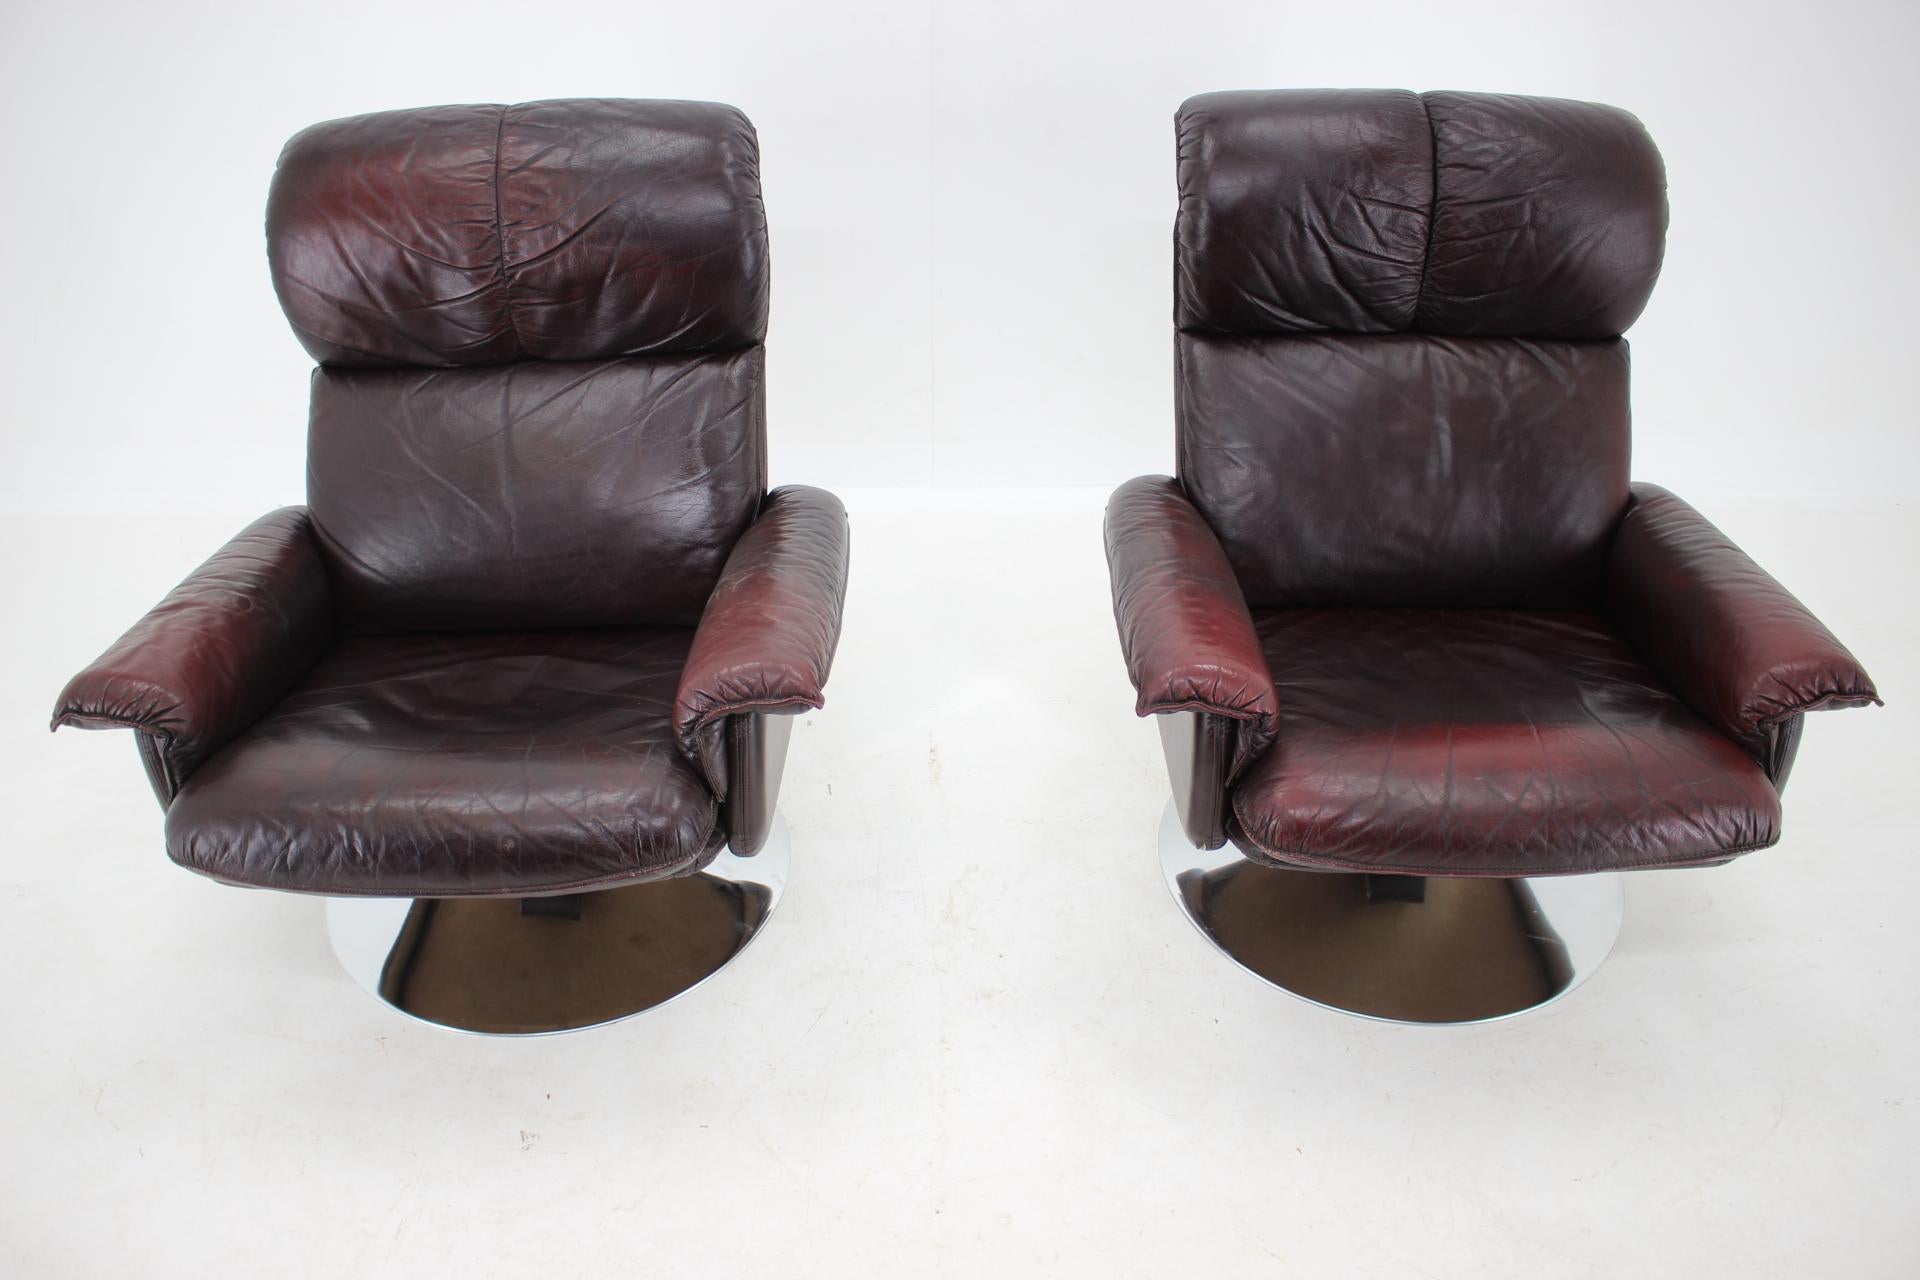 Scandinavian Space Age Style Leather and Chrome Armchairs by M-TOP, 1970s For Sale 2